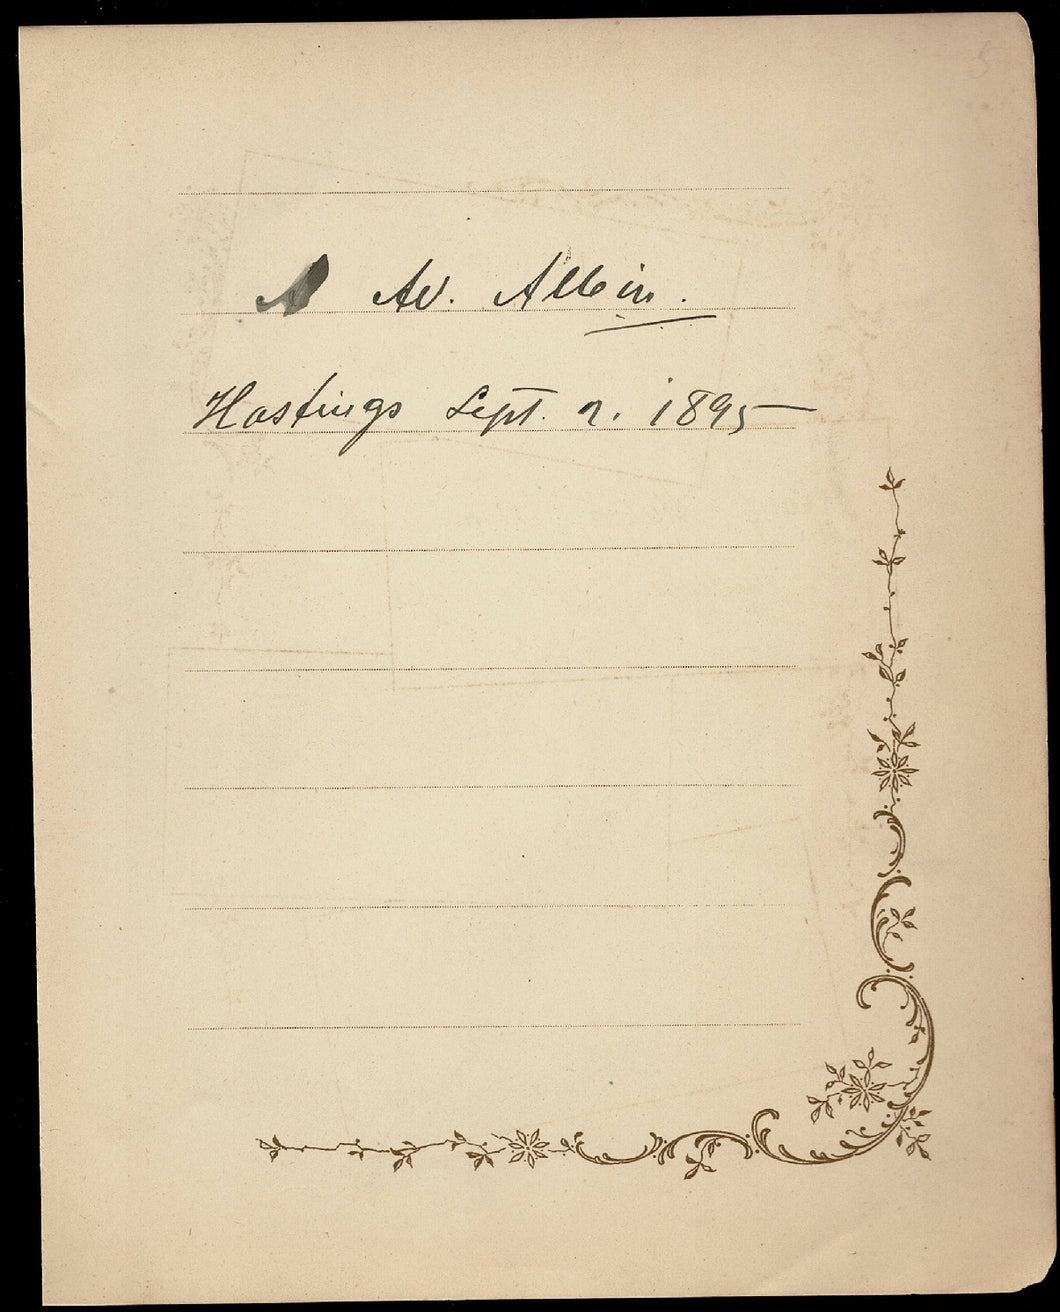 Autograph sheet with the handwritten signature